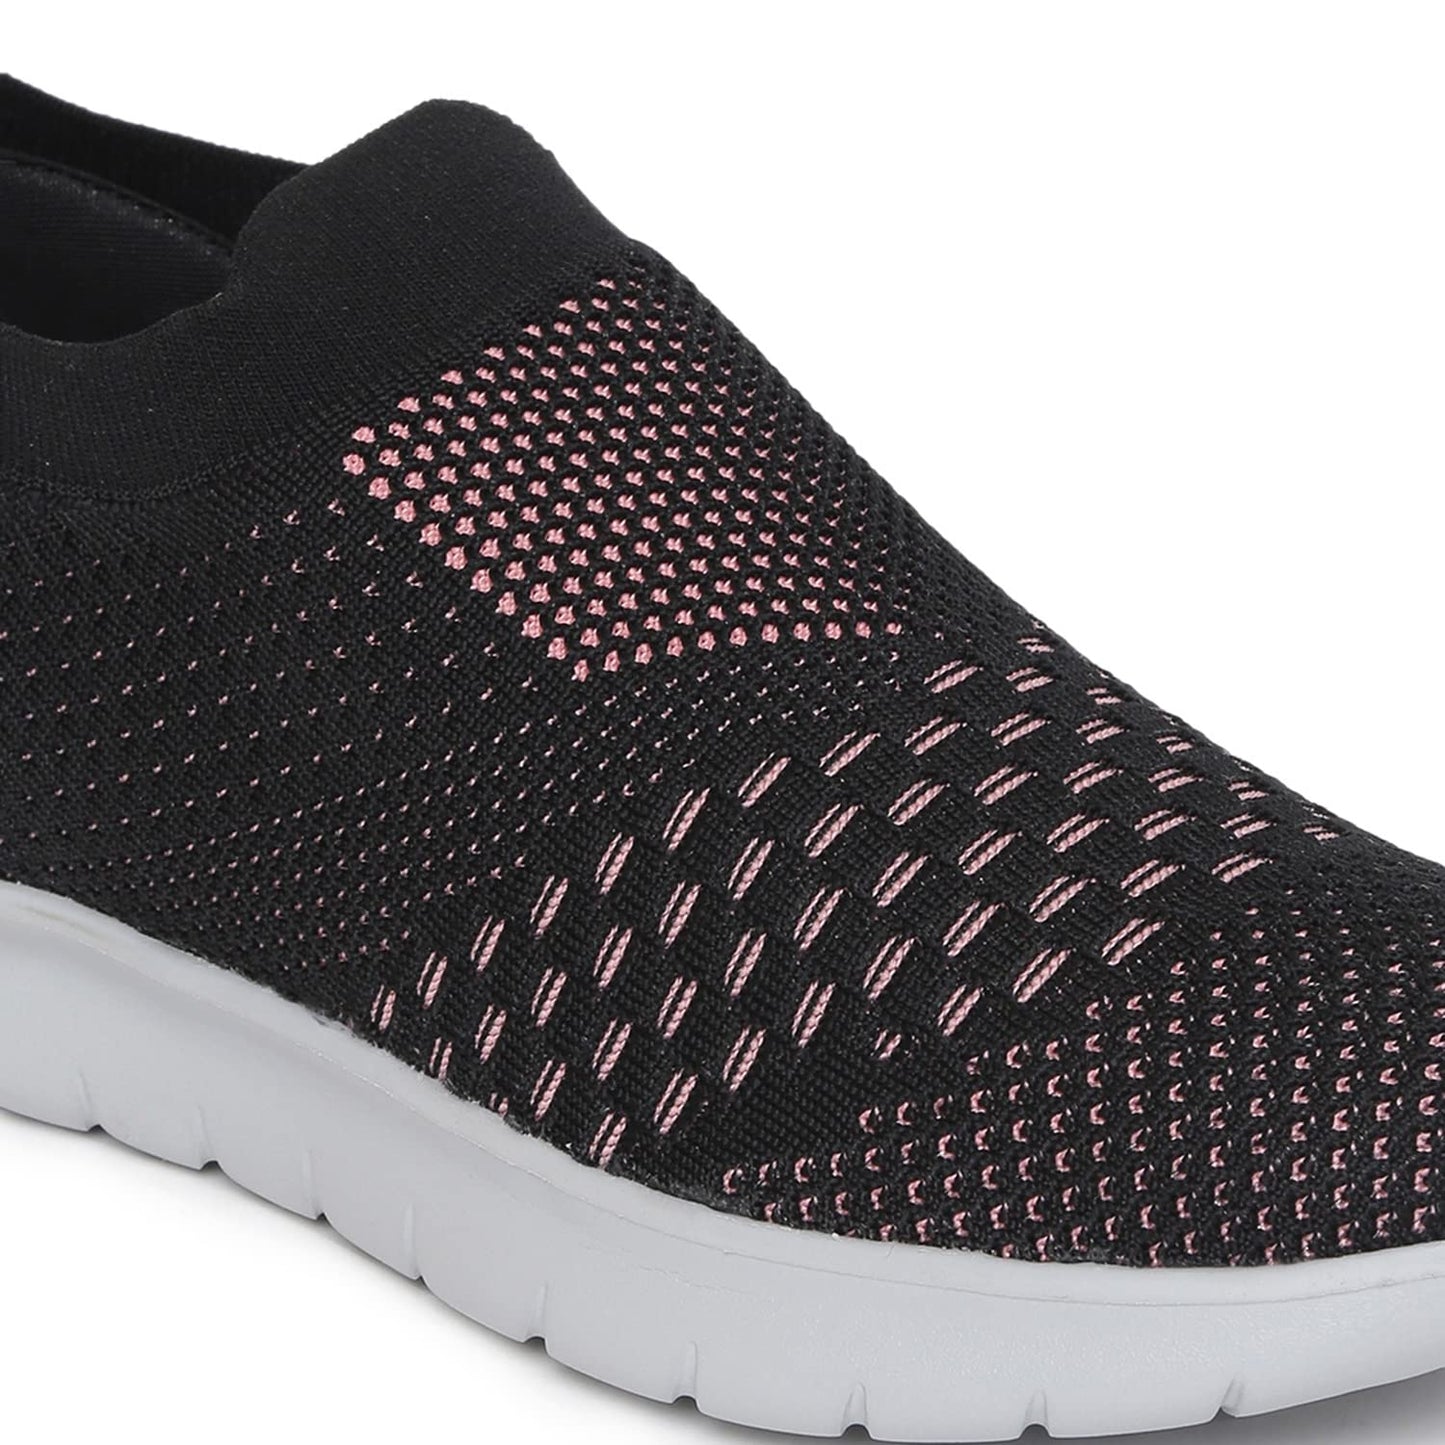 Marc Loire Women's Athleisure Knitted Active Wear Black Slip-On Shoes for Daily Walk, 3 UK